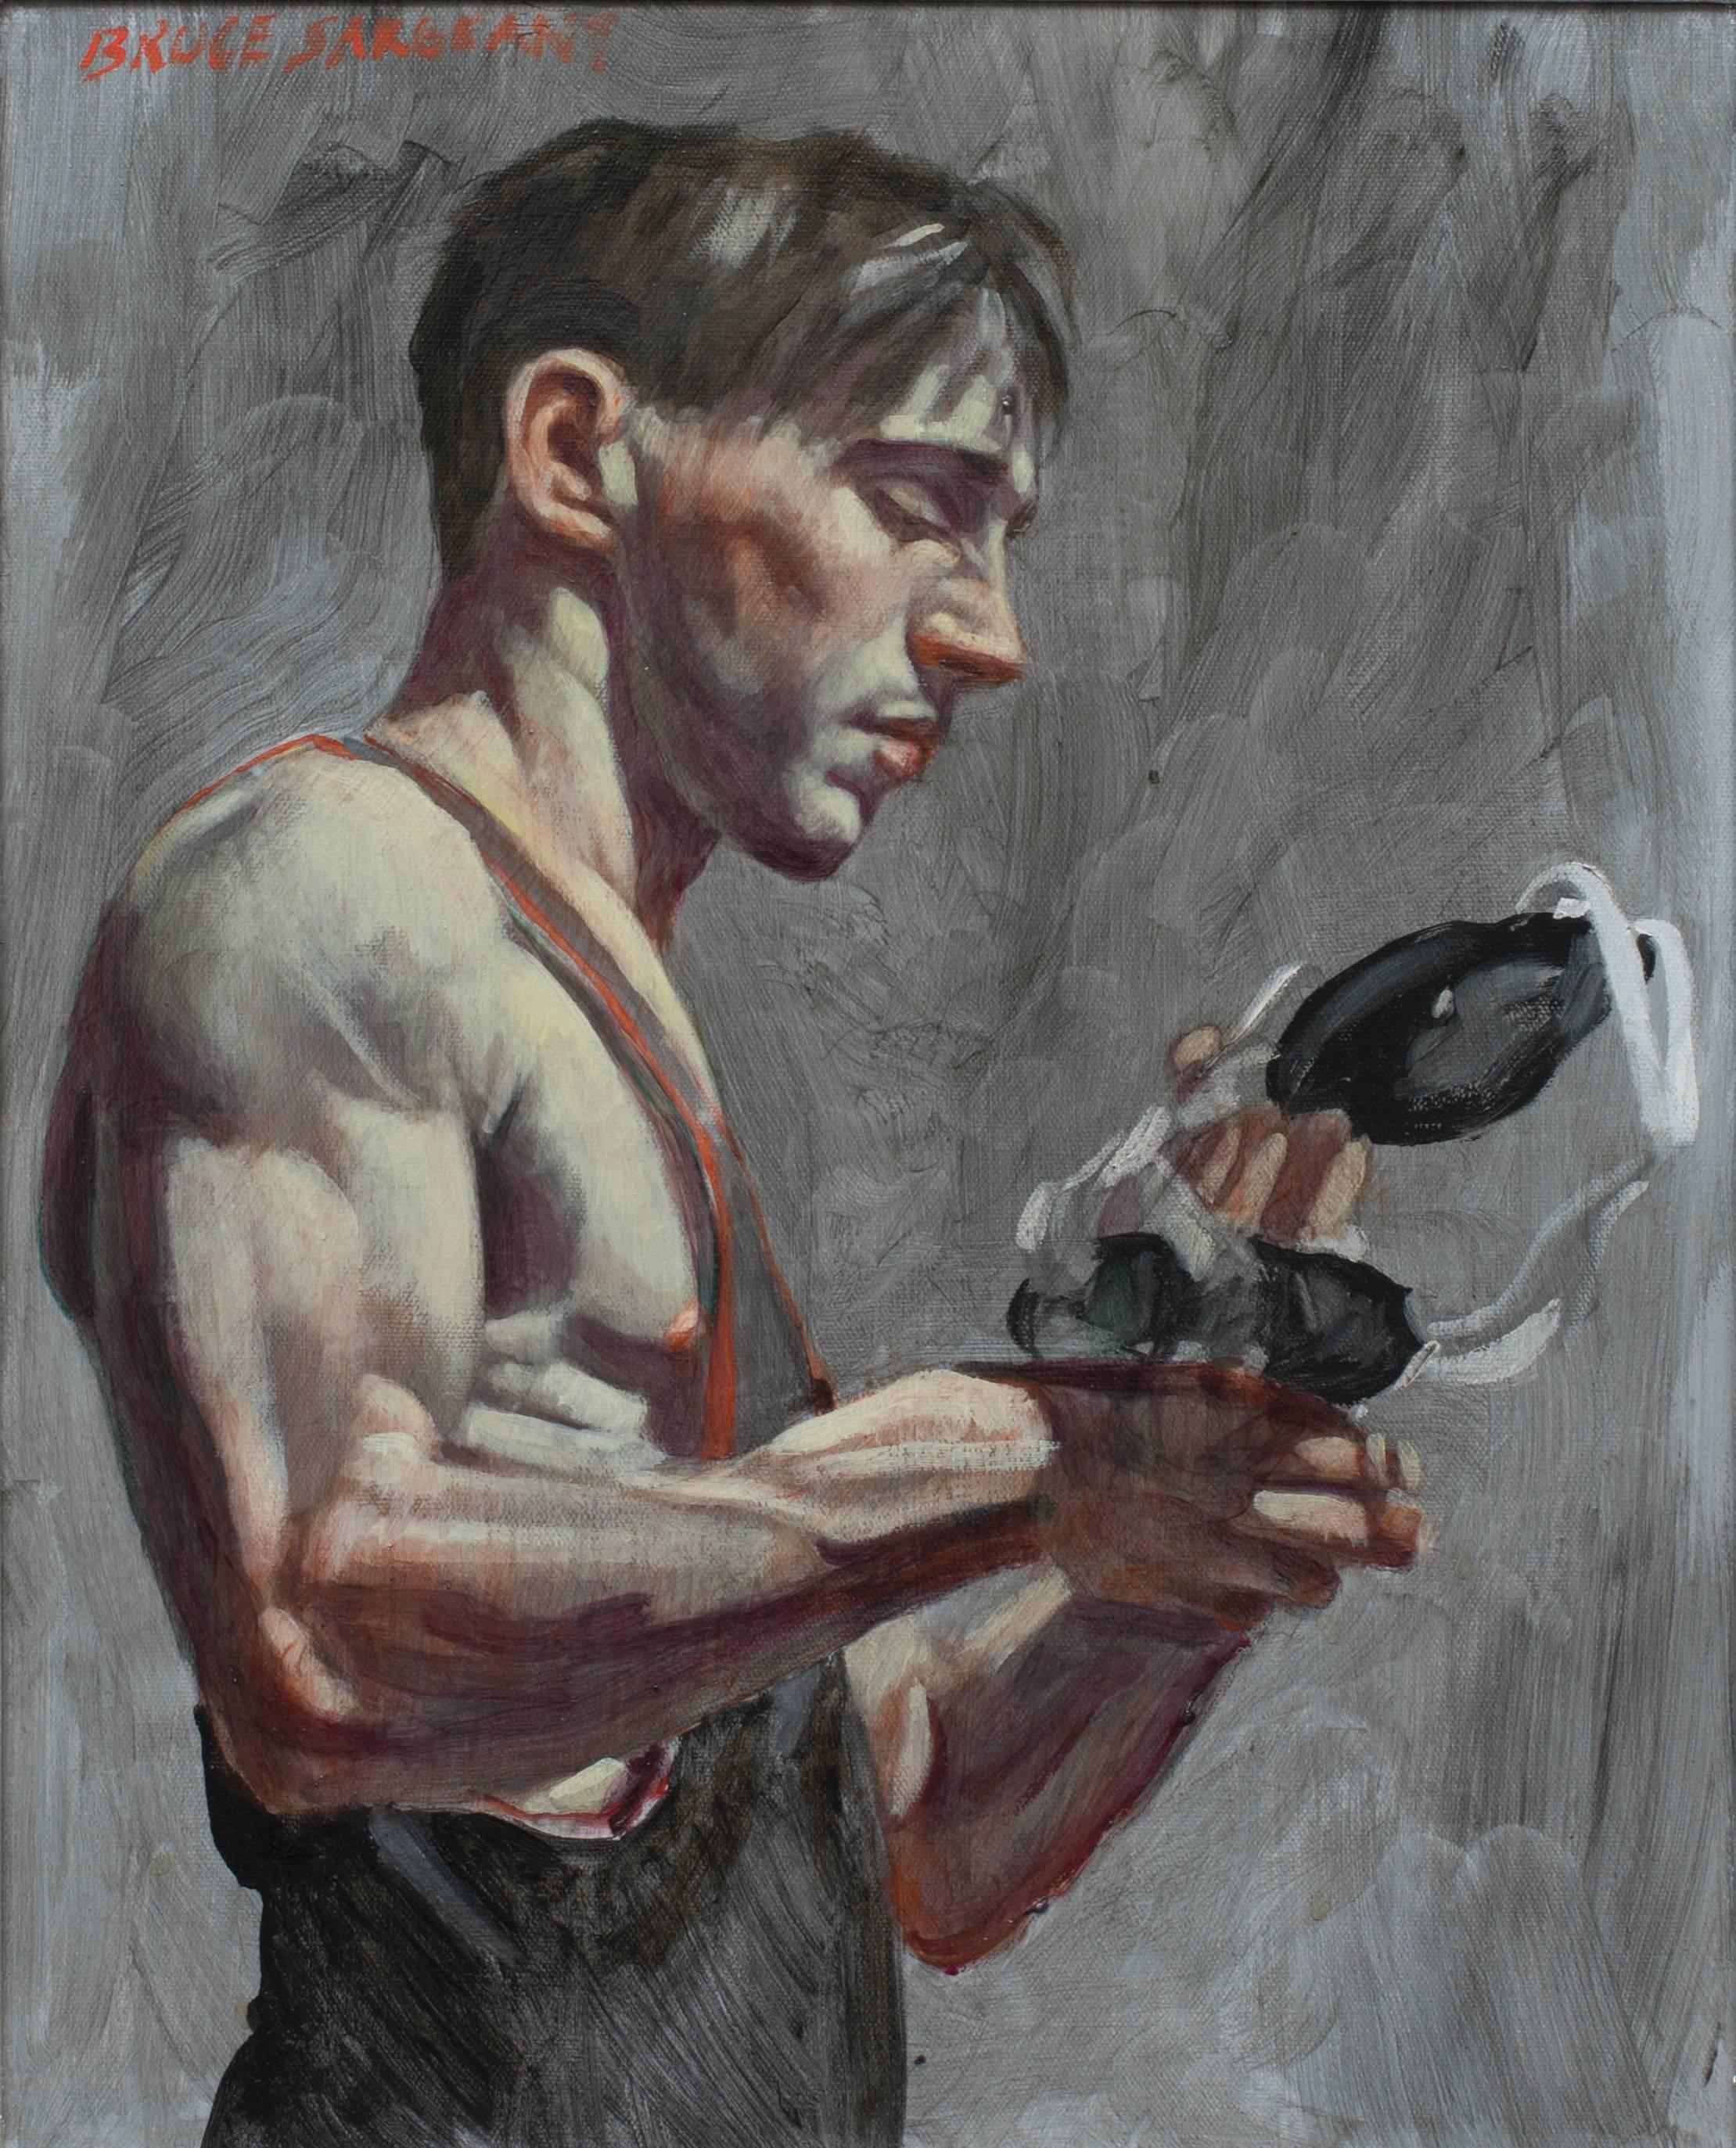 Wrestler with Cap (Contemporary Oil Portrait of a Male Athlete) - Painting by Mark Beard